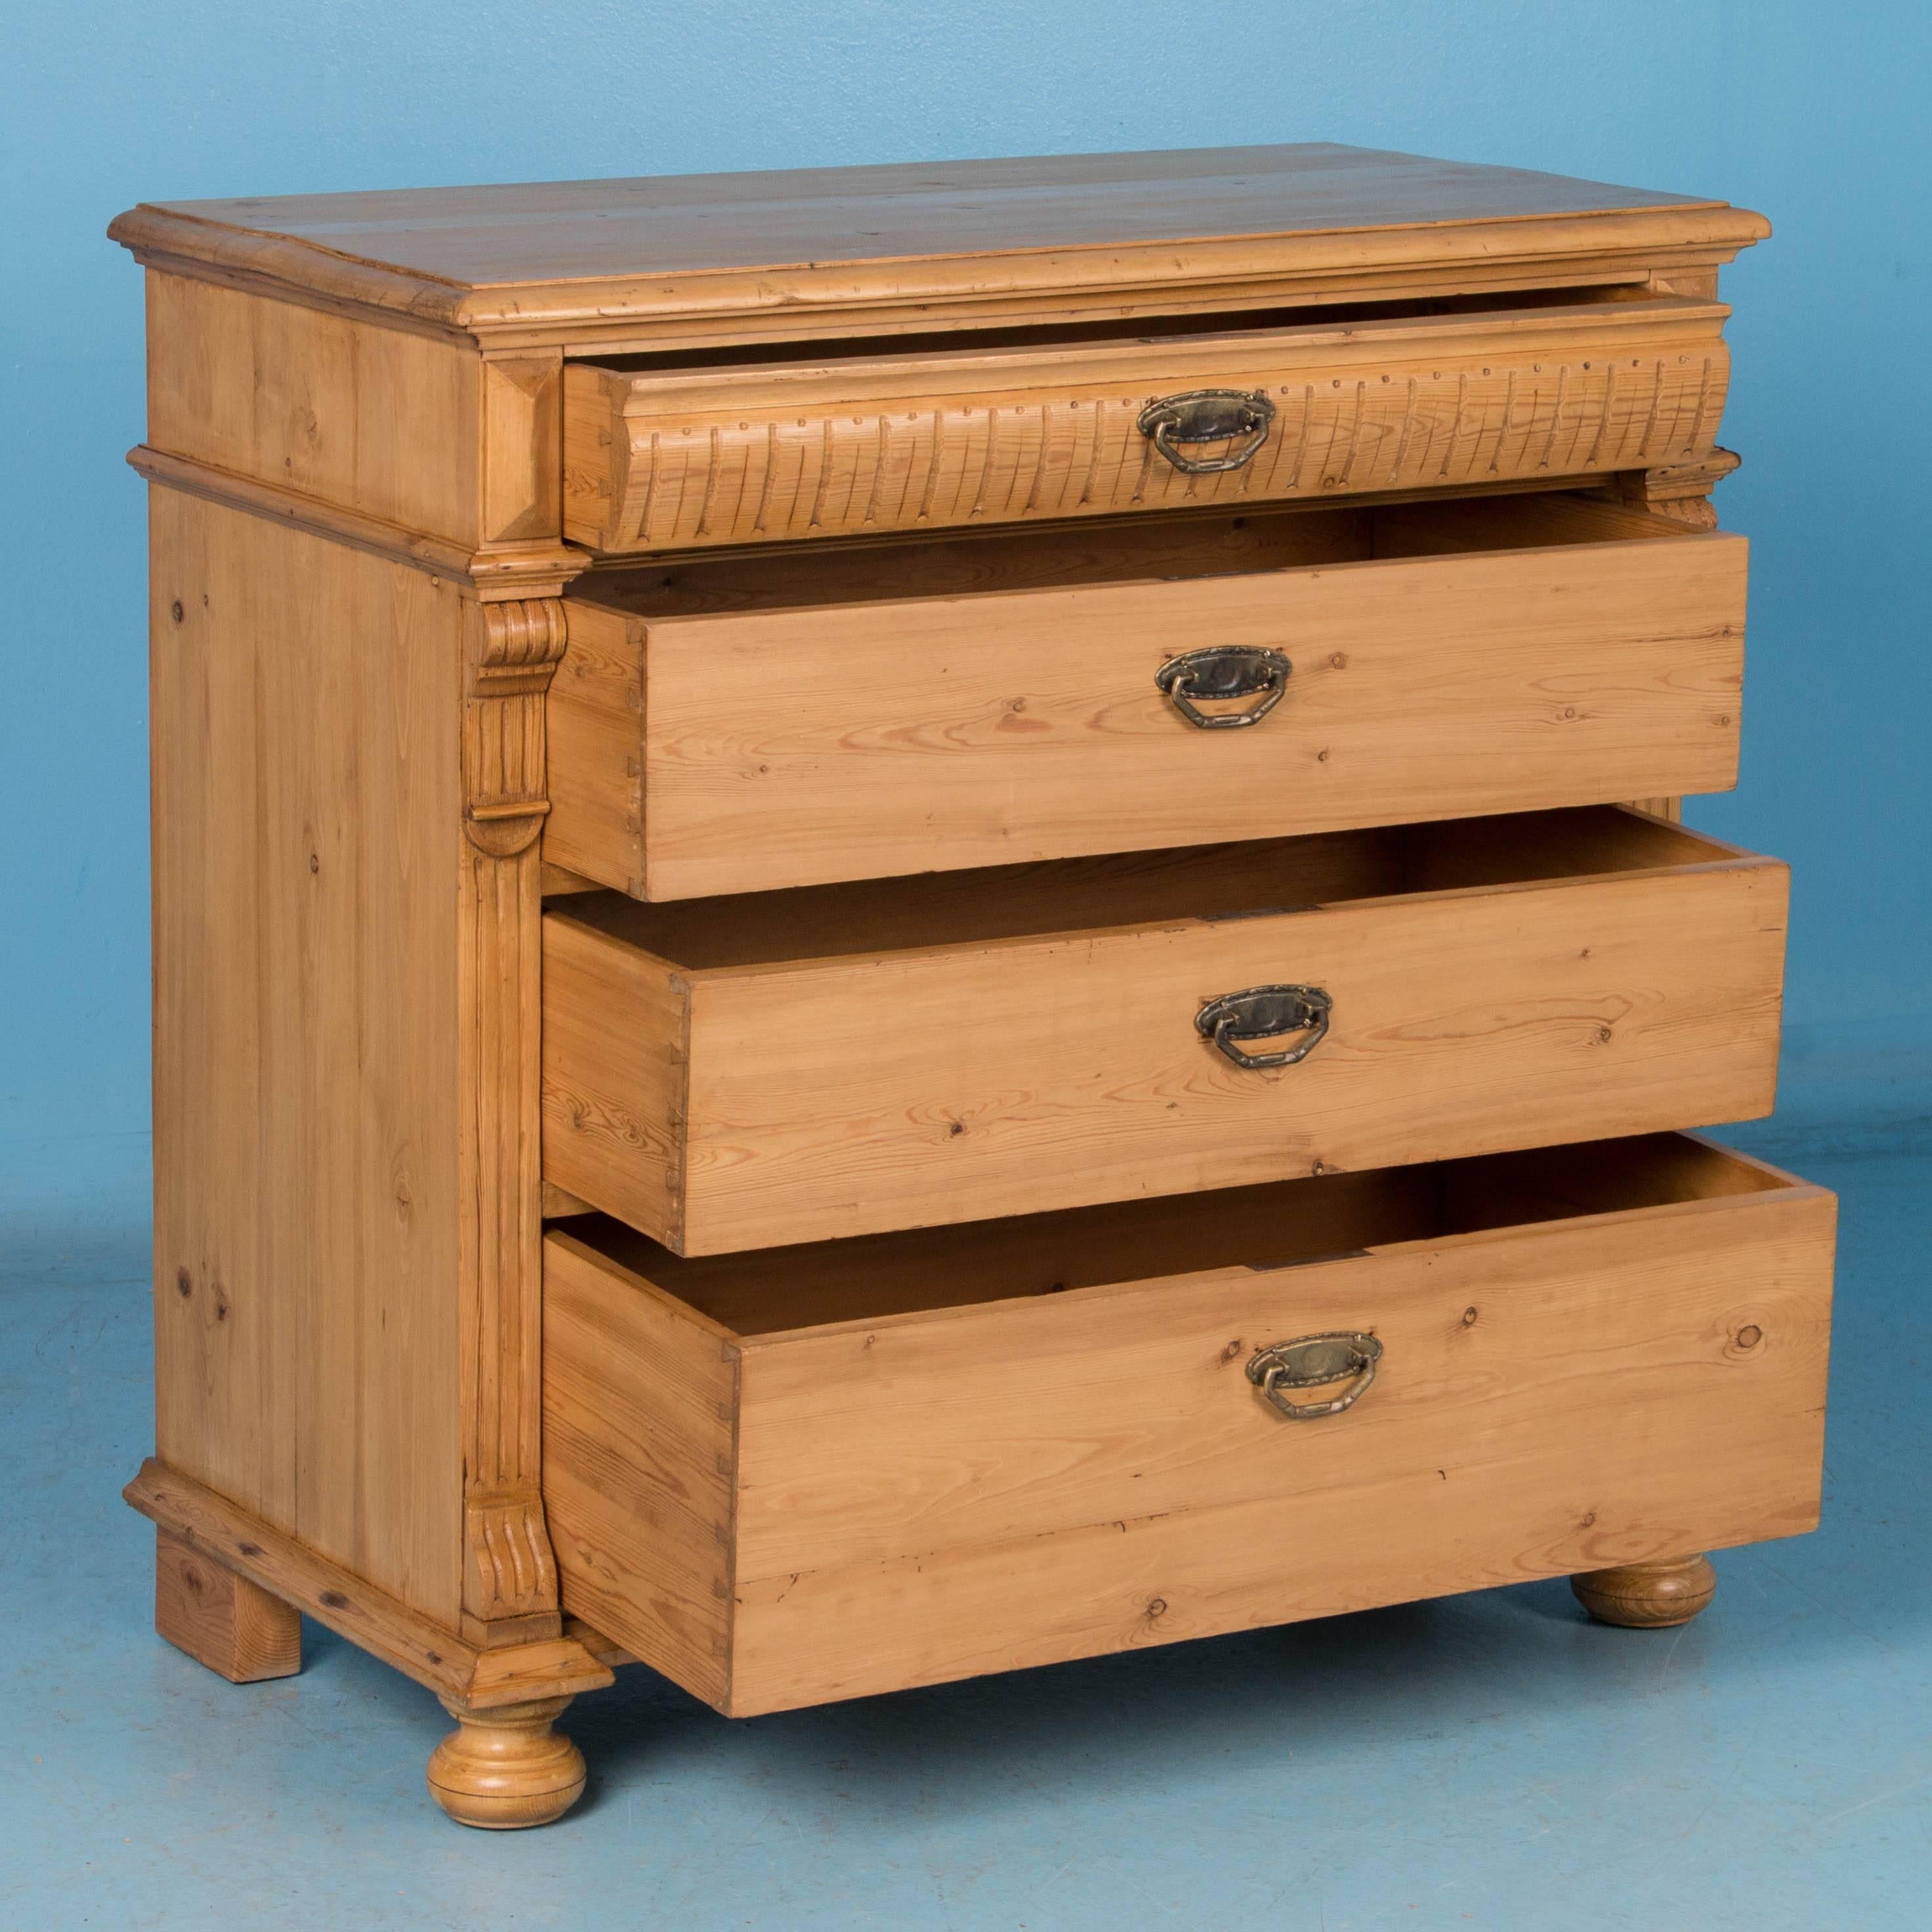 This lovely pine Chest of Drawers has been given a wax finish to bring out the warmth of the wood. The dentil molding along the top drawer and decorative fluted trim along the sides were often used as style elements in Danish chests from this